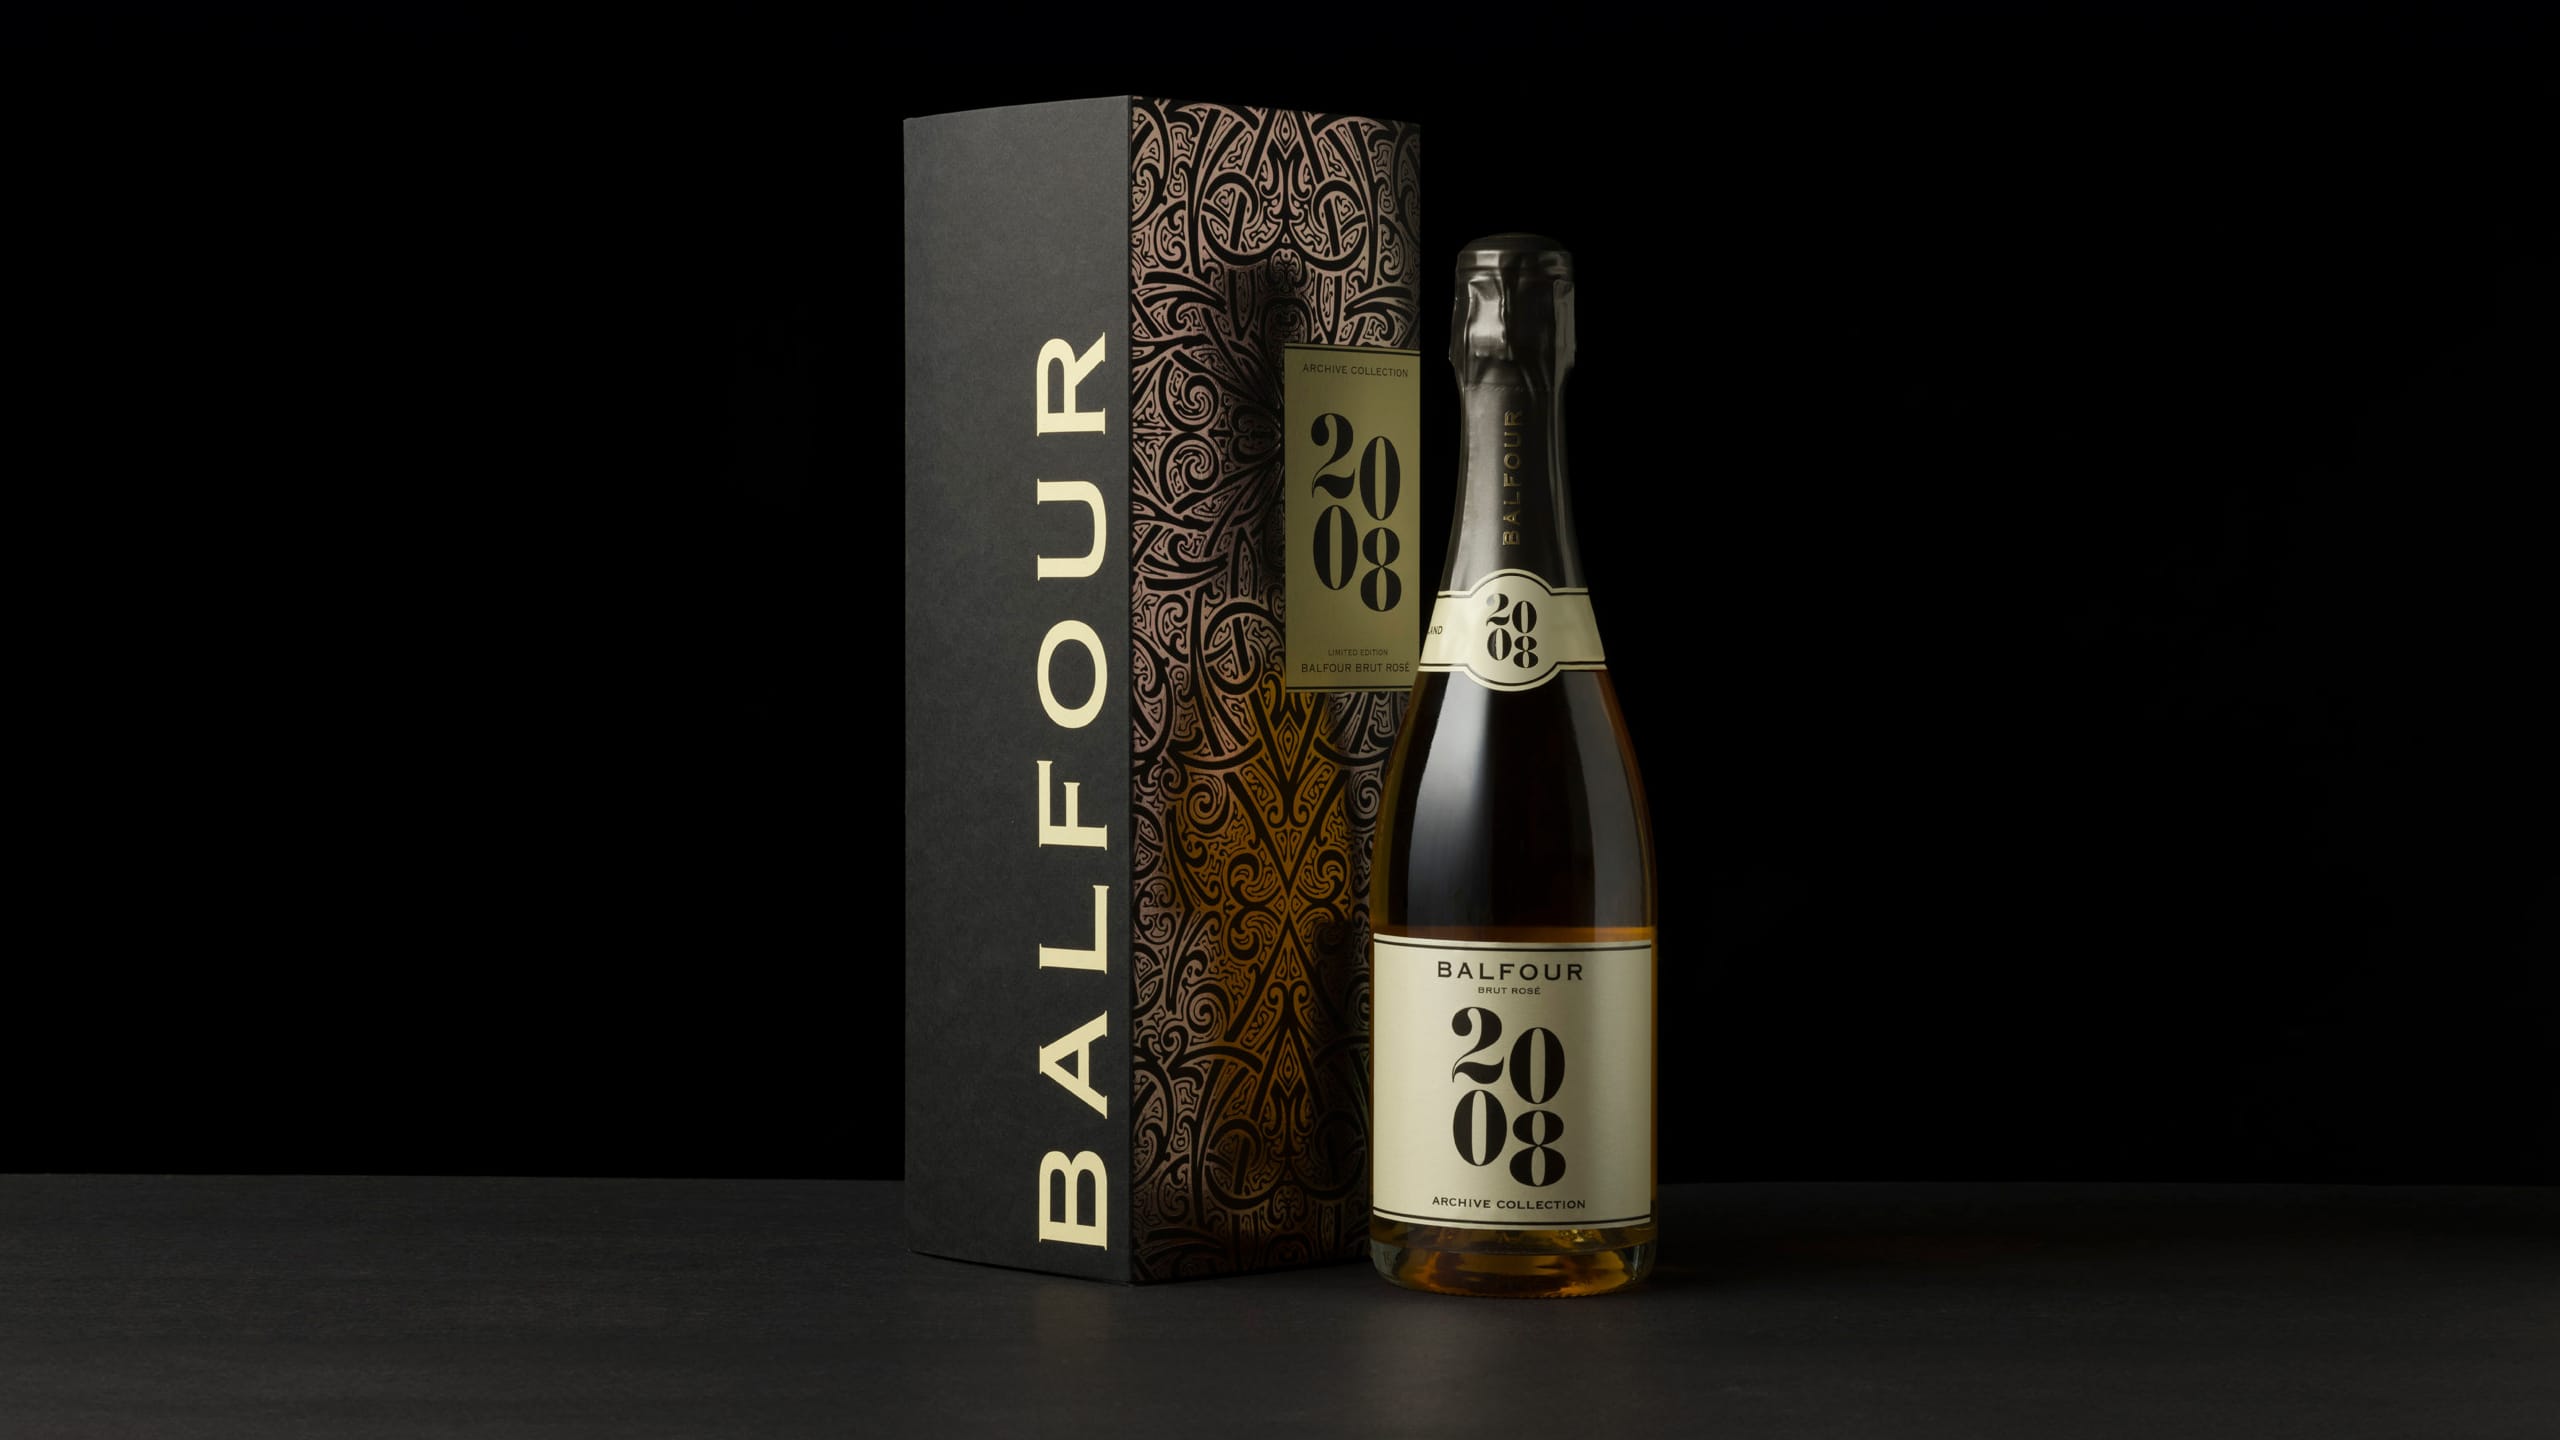 Balfour Winery Archive Collection: Packaging, Website design and development